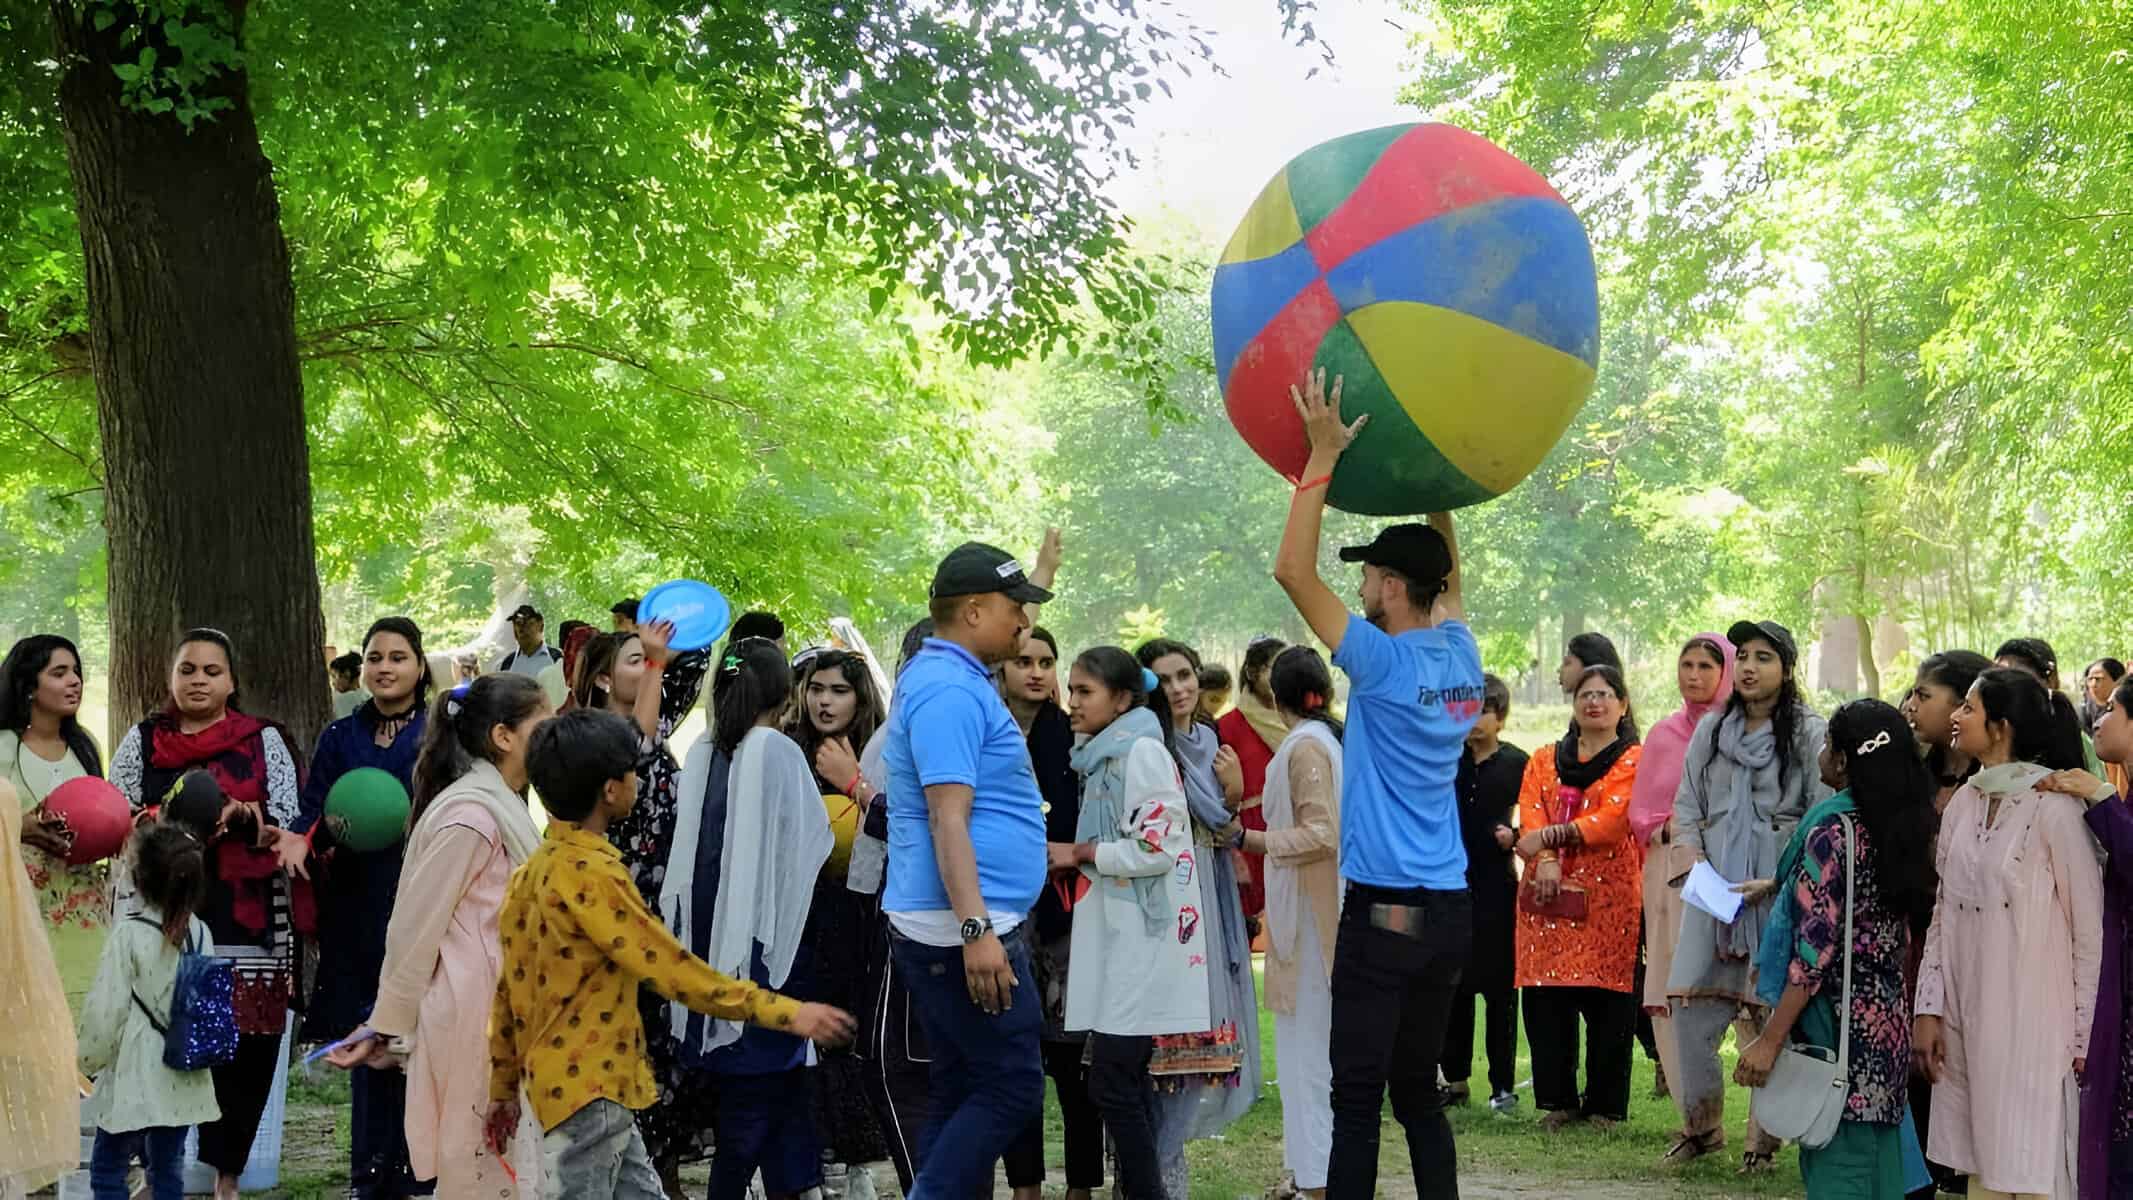 A group of joyful young people and adults engaging in outdoor activities, with a focus on a colorful oversized beach ball being tossed in the air among a crowd of smiling faces in a lush park setting.